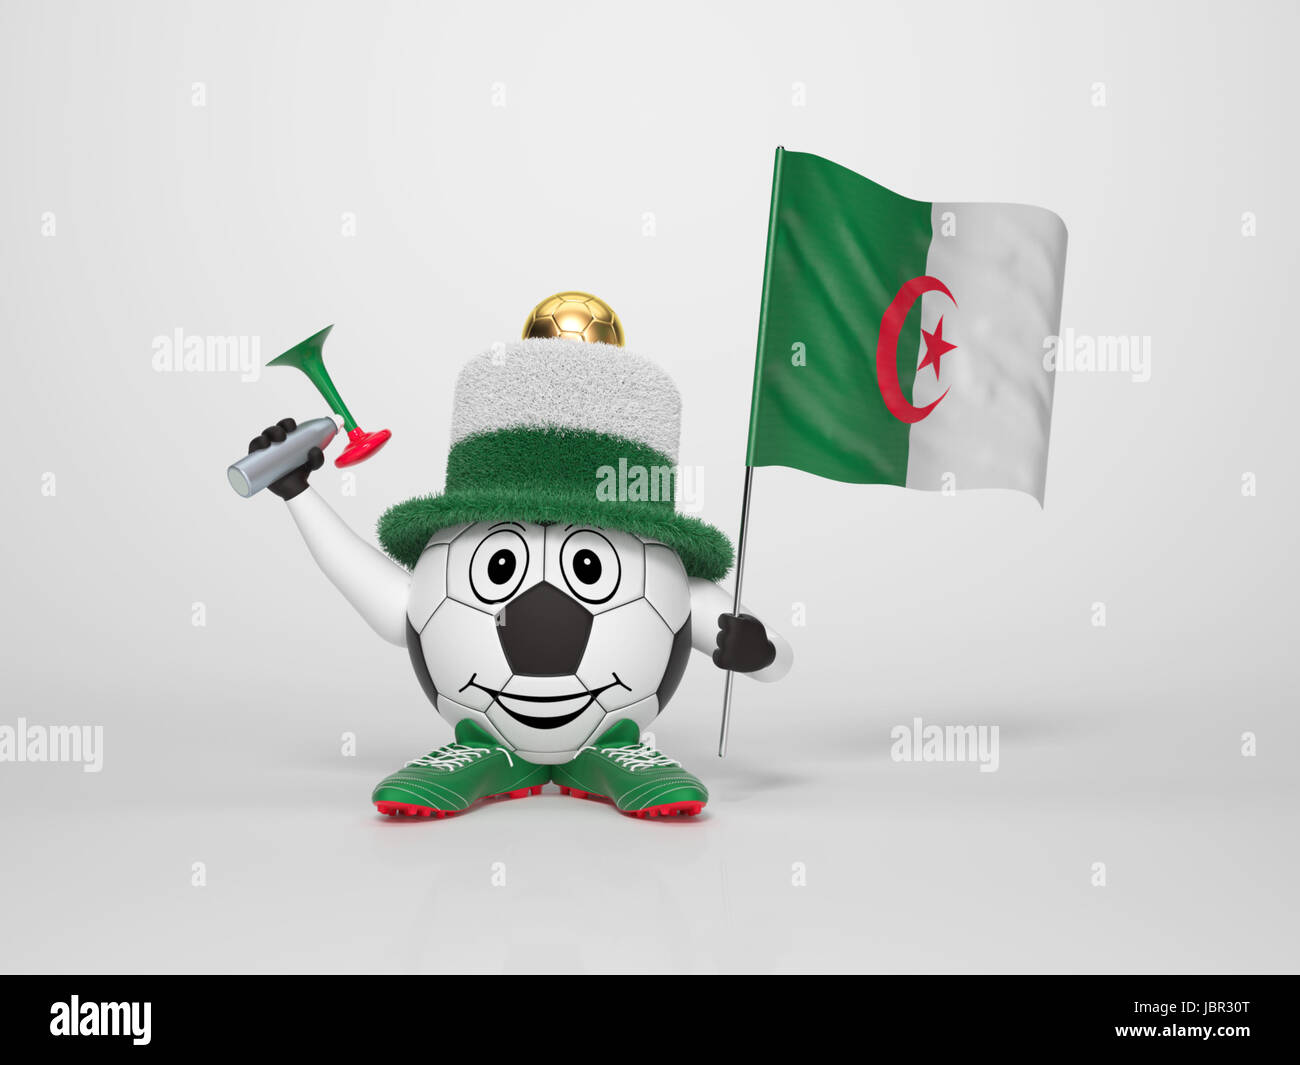 A cute and funny soccer character holding the national flag of Algeria and a horn dressed in the colors of Algeria on bright background supporting his team Stock Photo